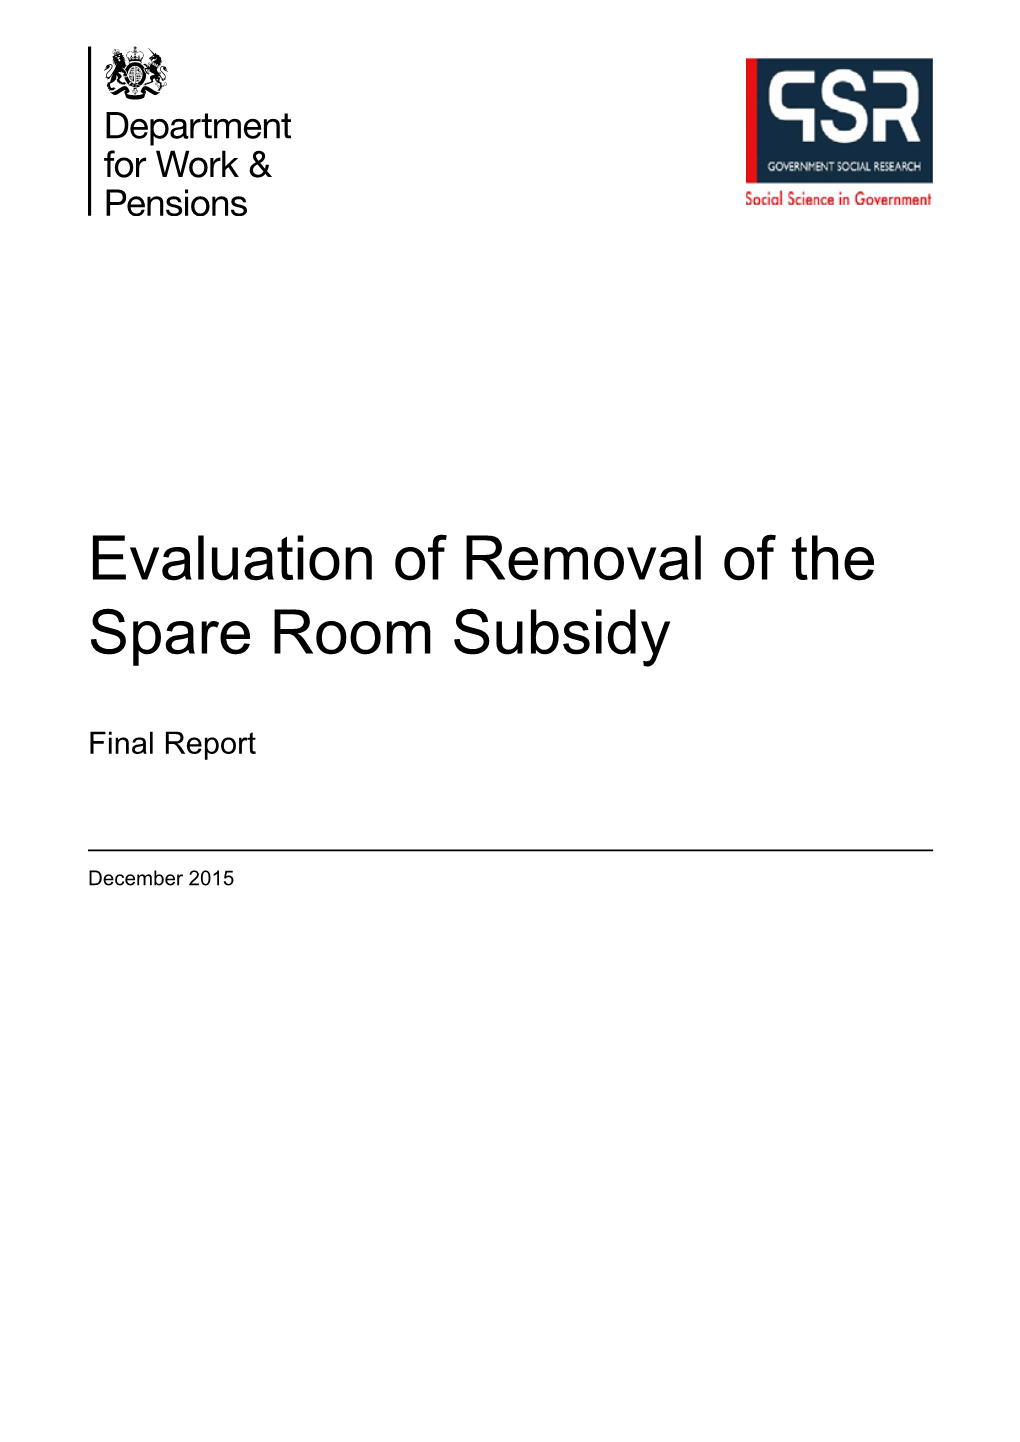 Evaluation of Removal of the Spare Room Subsidy